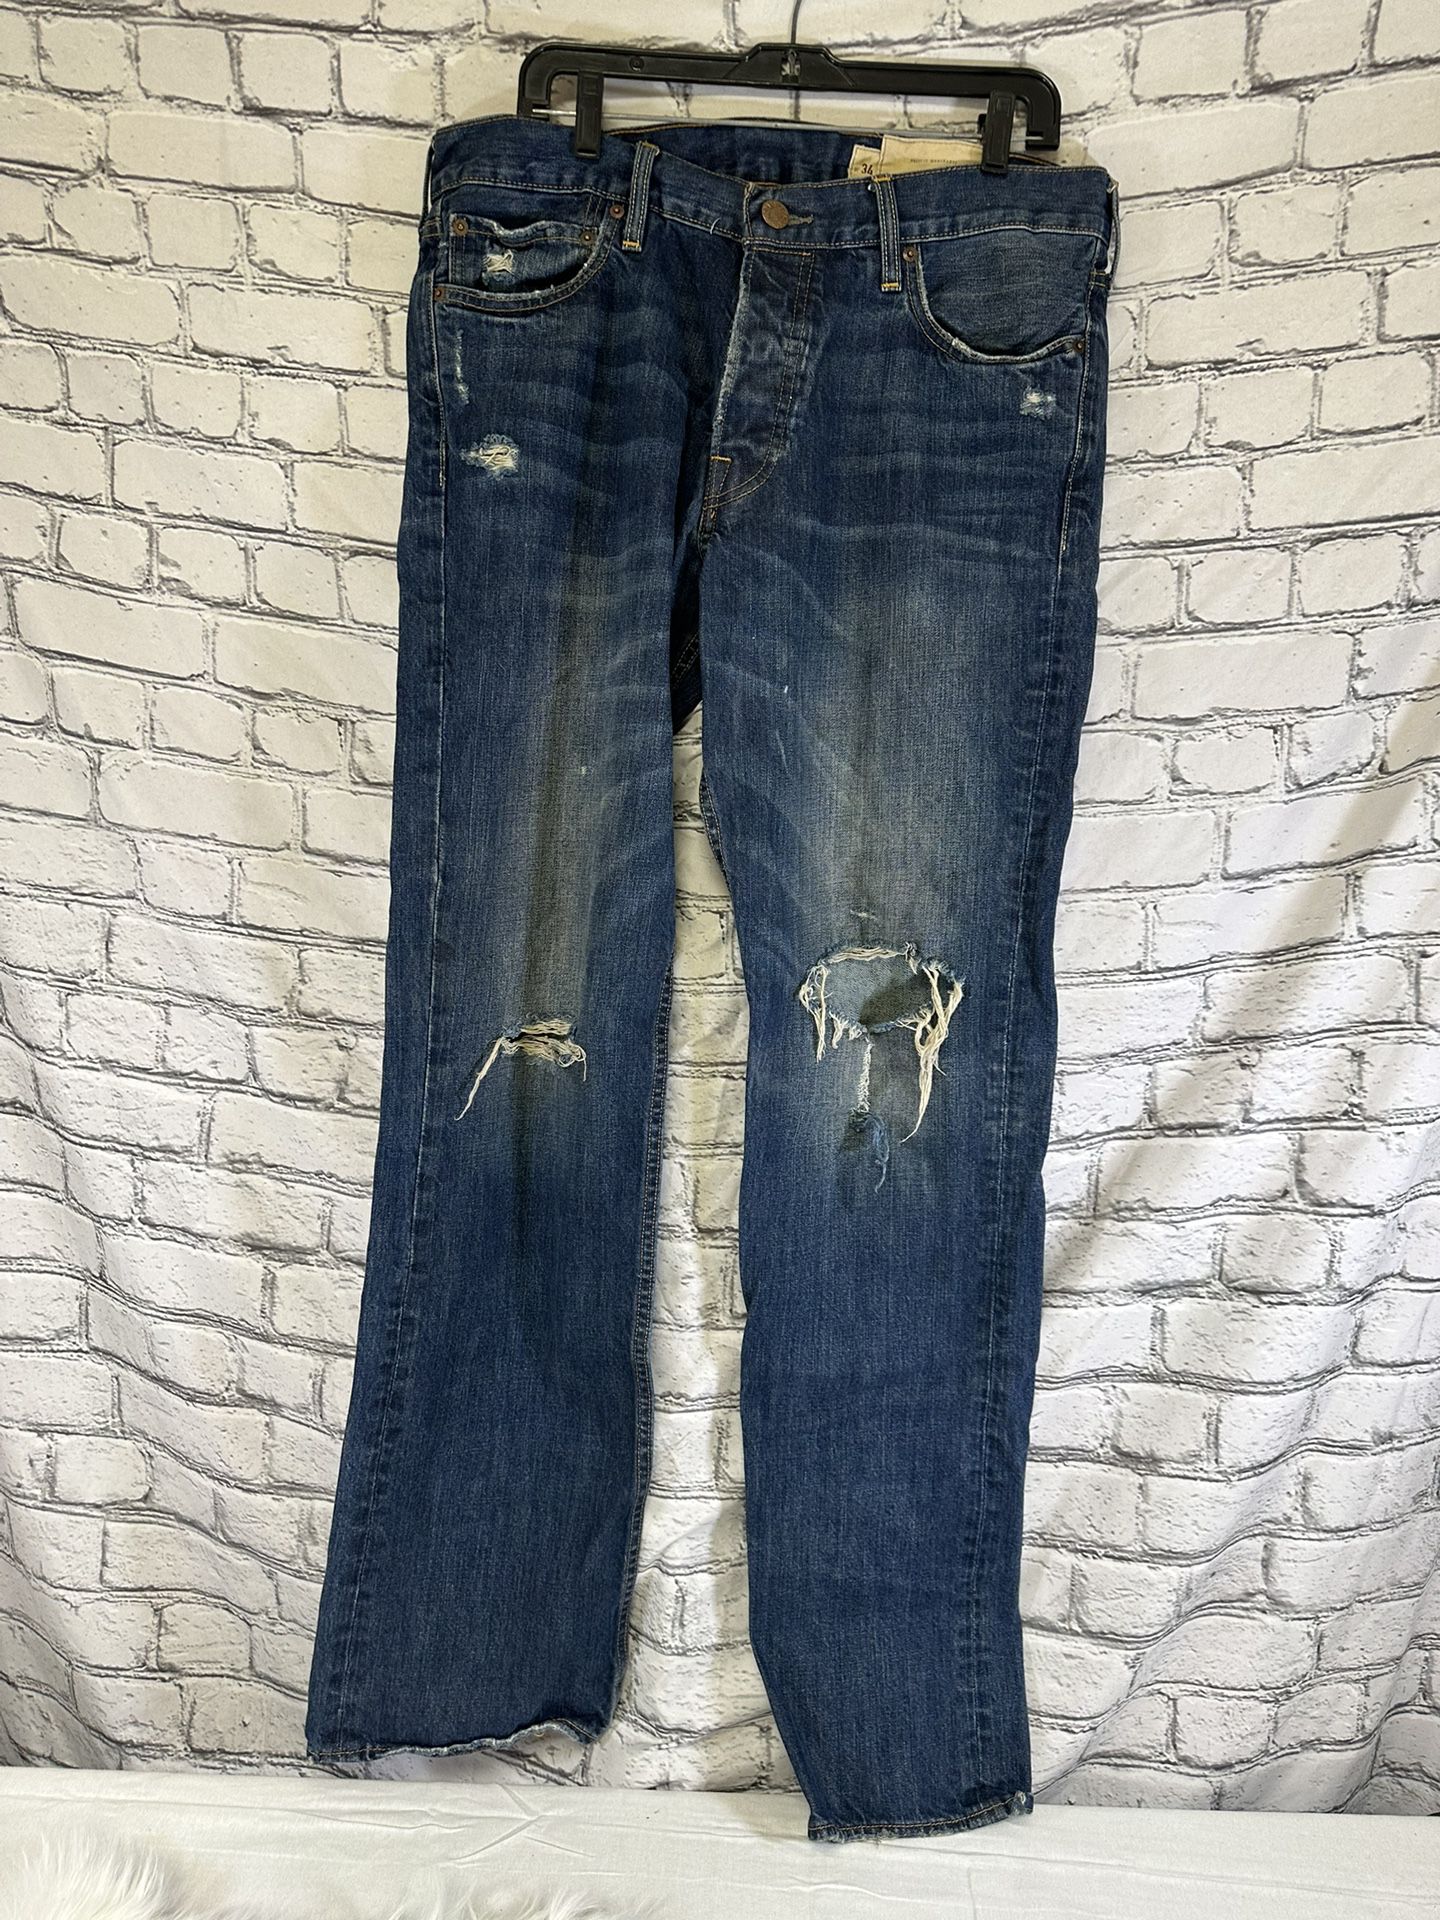 Hollister Co BalBoa Classic Straight 34x34 Blue Jeans Distressed 